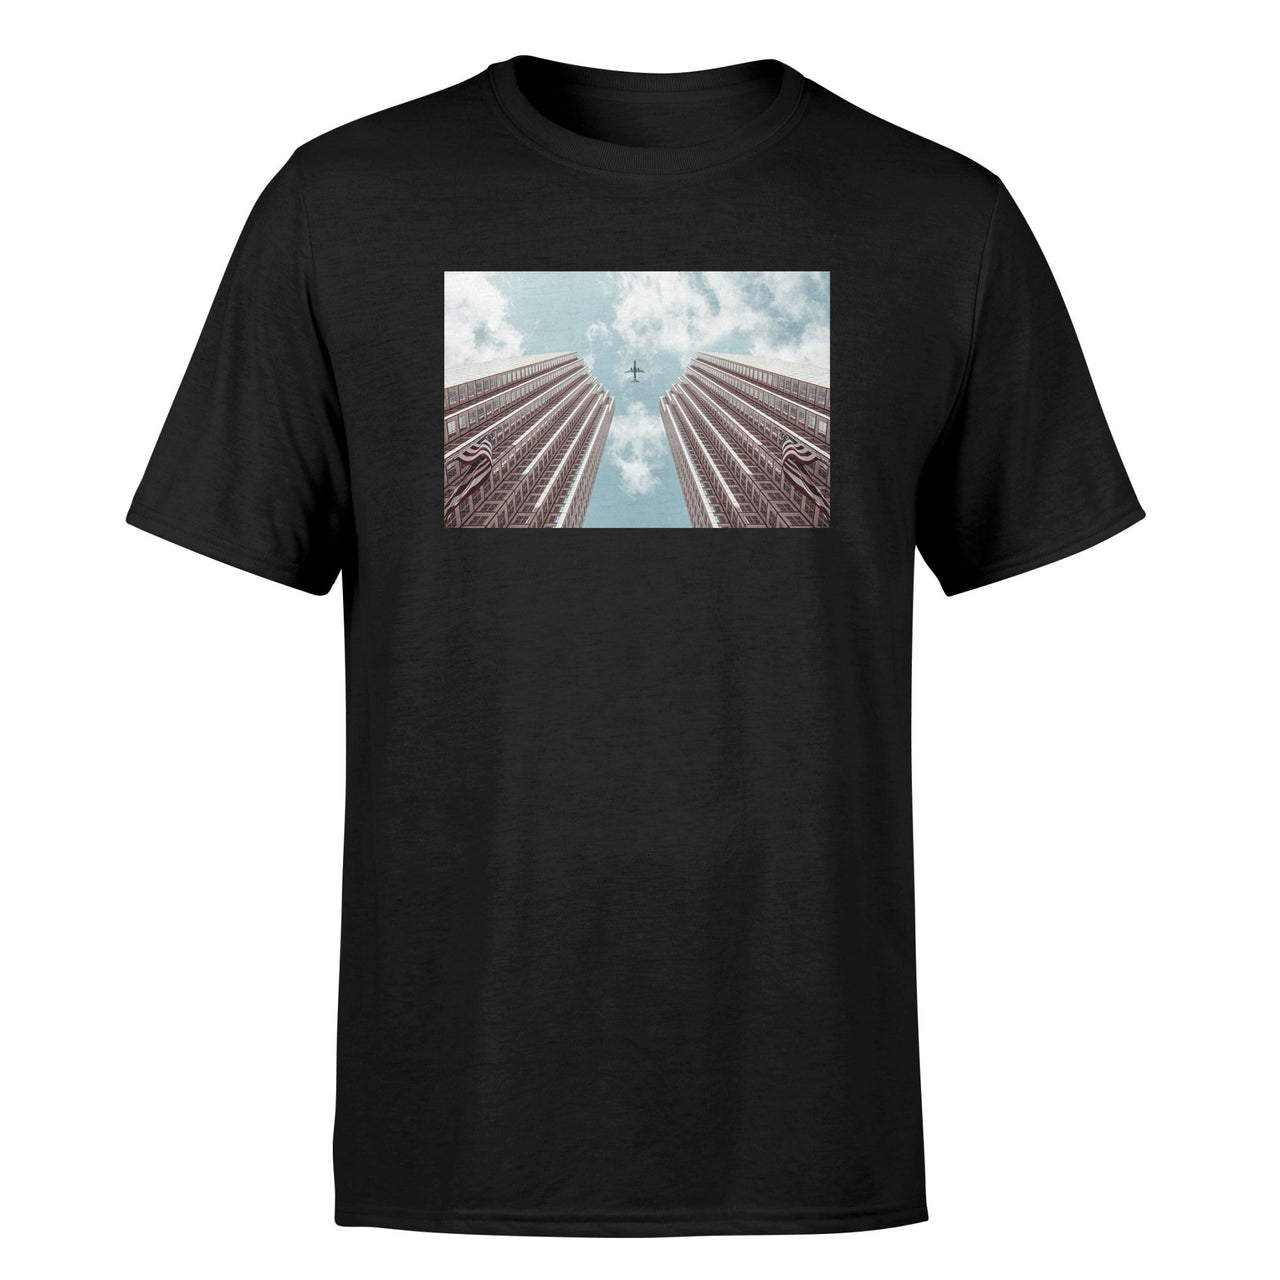 Airplane Flying over Big Buildings Designed T-Shirts